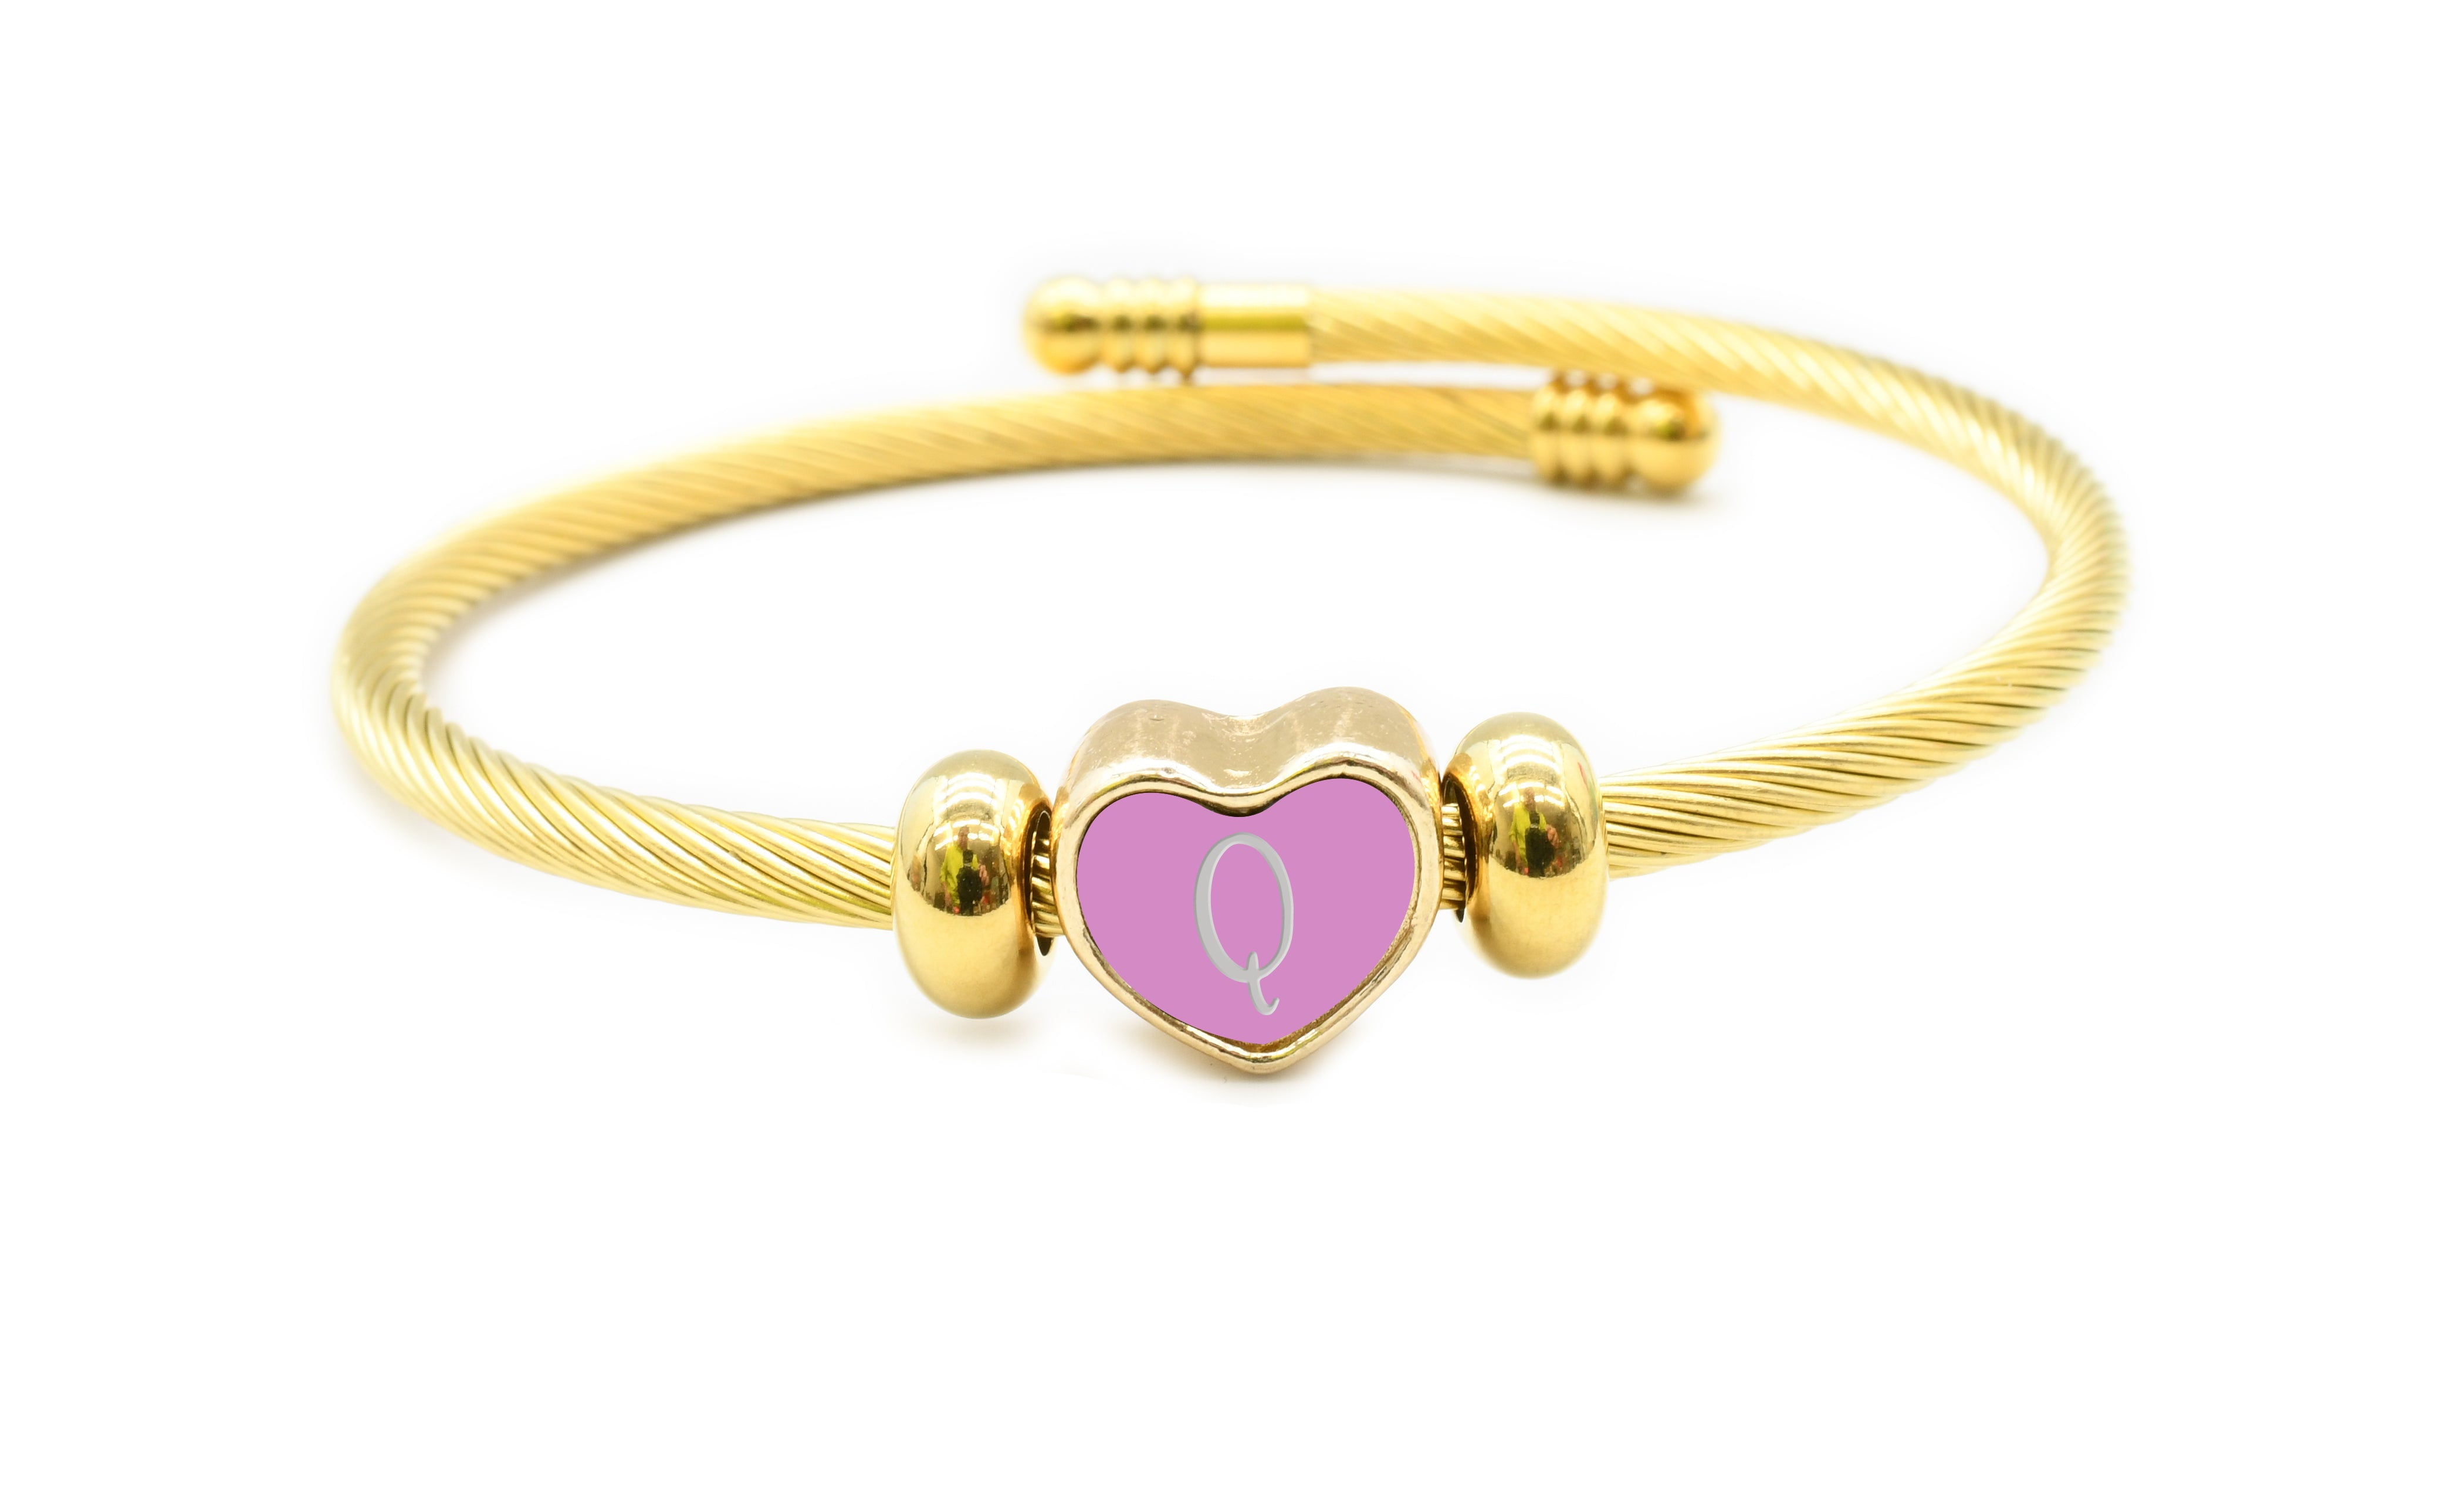 7.75 inch Interchangeable Reversible Gold Tone Heart Cable Initial Bracelets by Pink Box - Lilac